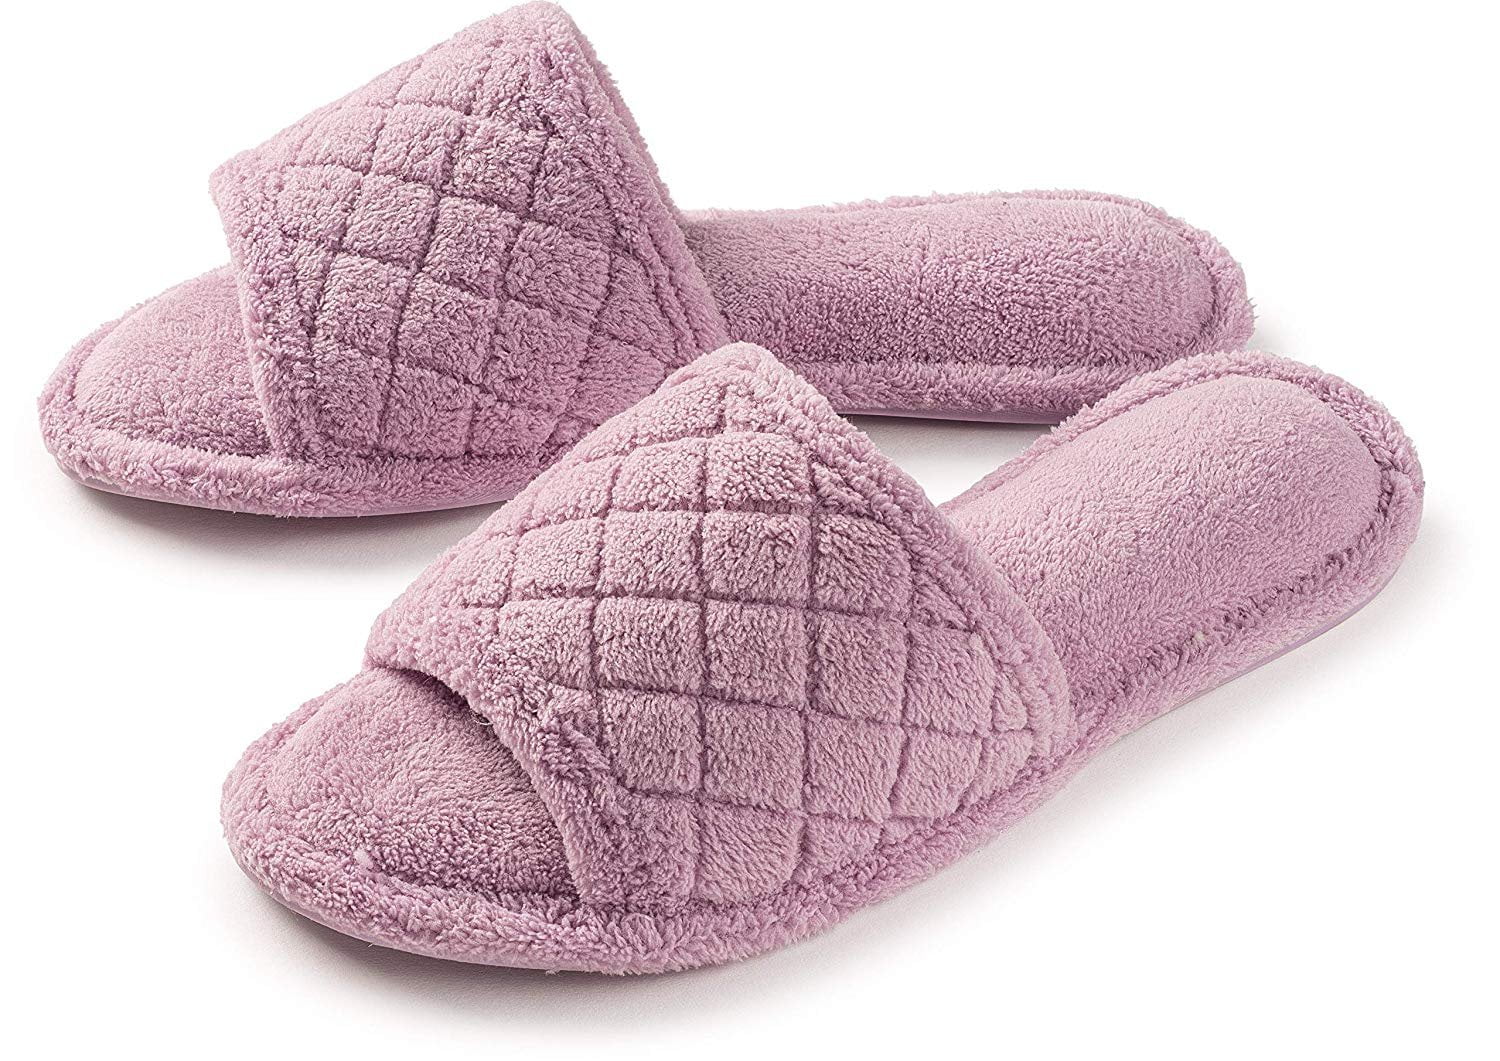 House and Shower Shoes Open Toe Fuzzy Terry Bathroom Roxoni Ultra Soft Spa Slippers for Women Washable Cozy 